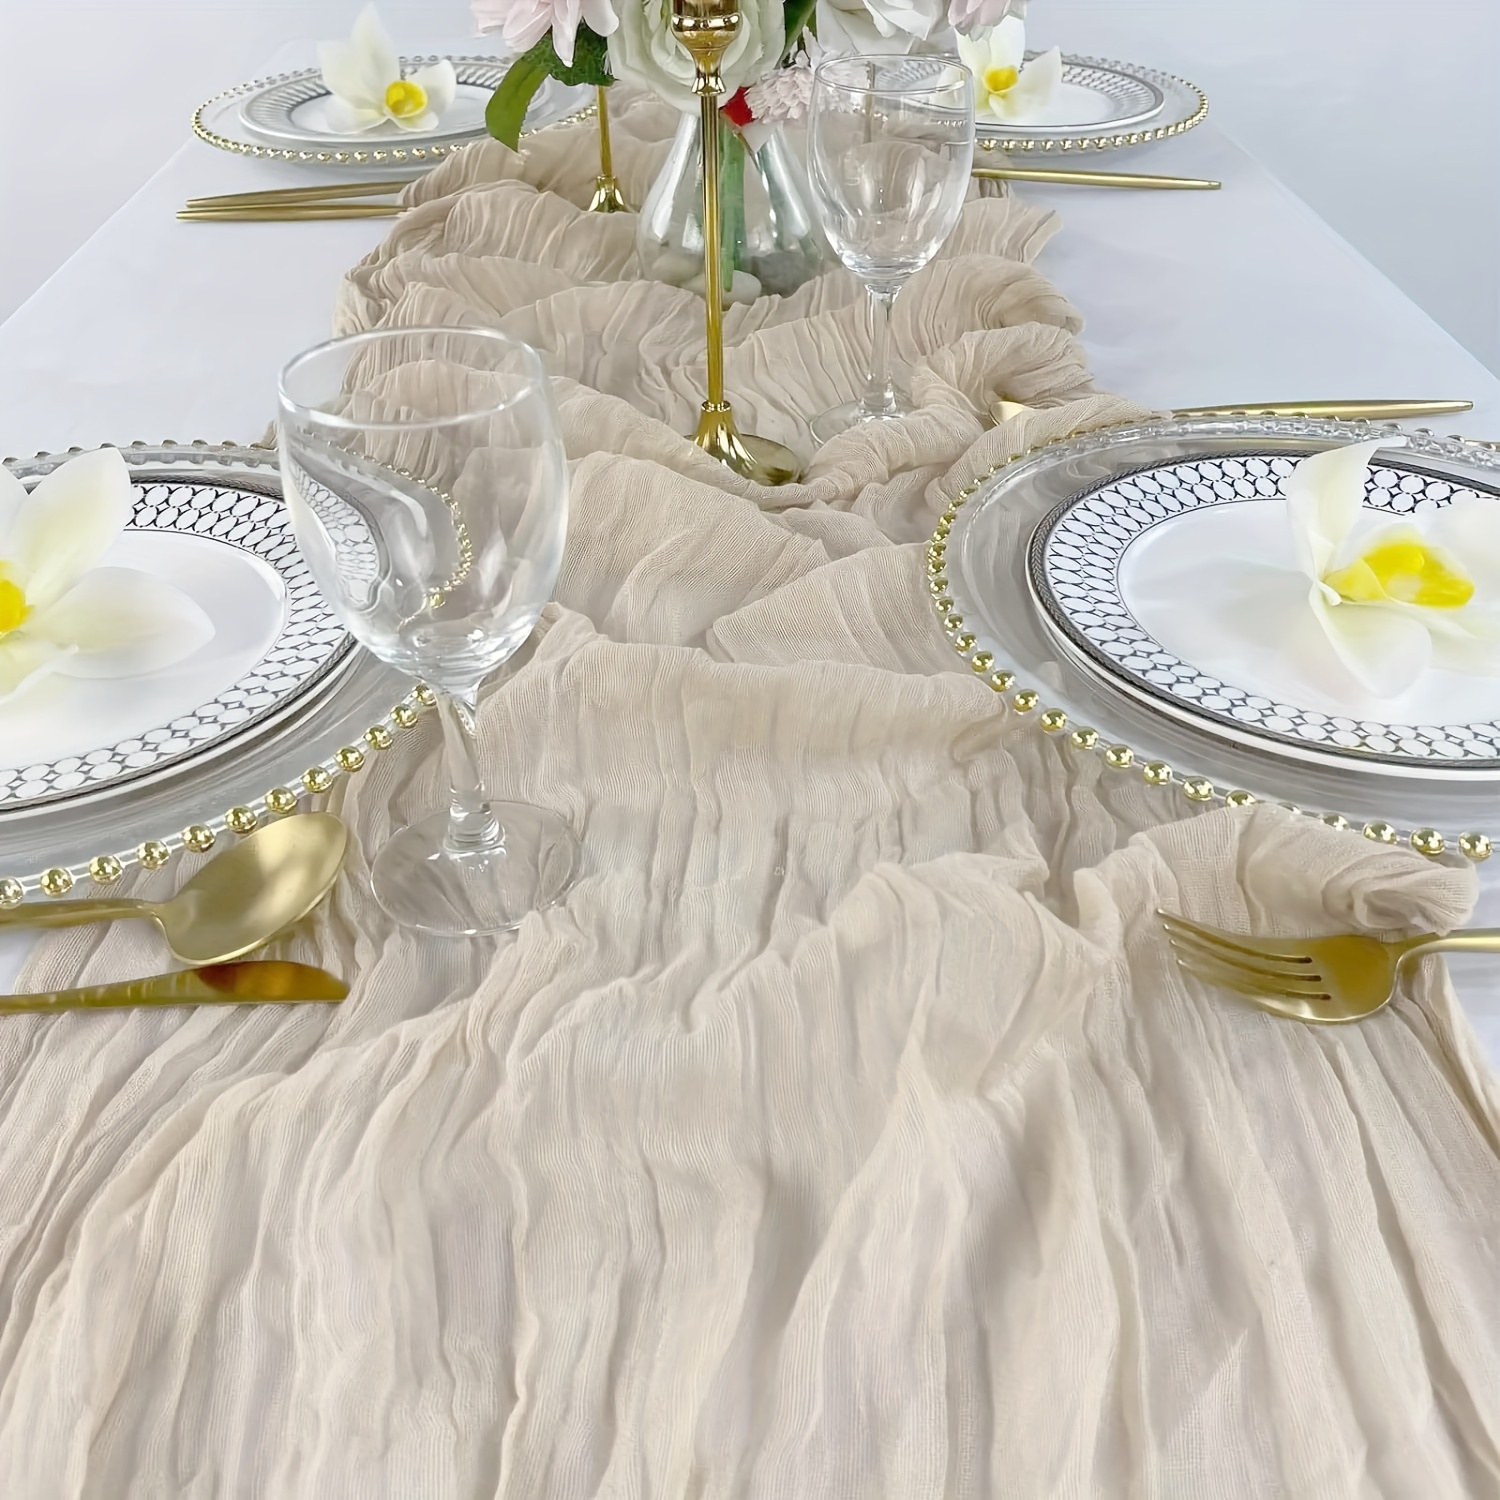 

Set Of 6 Champagne Sheer Table Runners For Weddings, Birthdays, Bridal & Baby Showers - Polyester Gauze Tablecloths, Elegant Machine-made Table Draping For Special Events